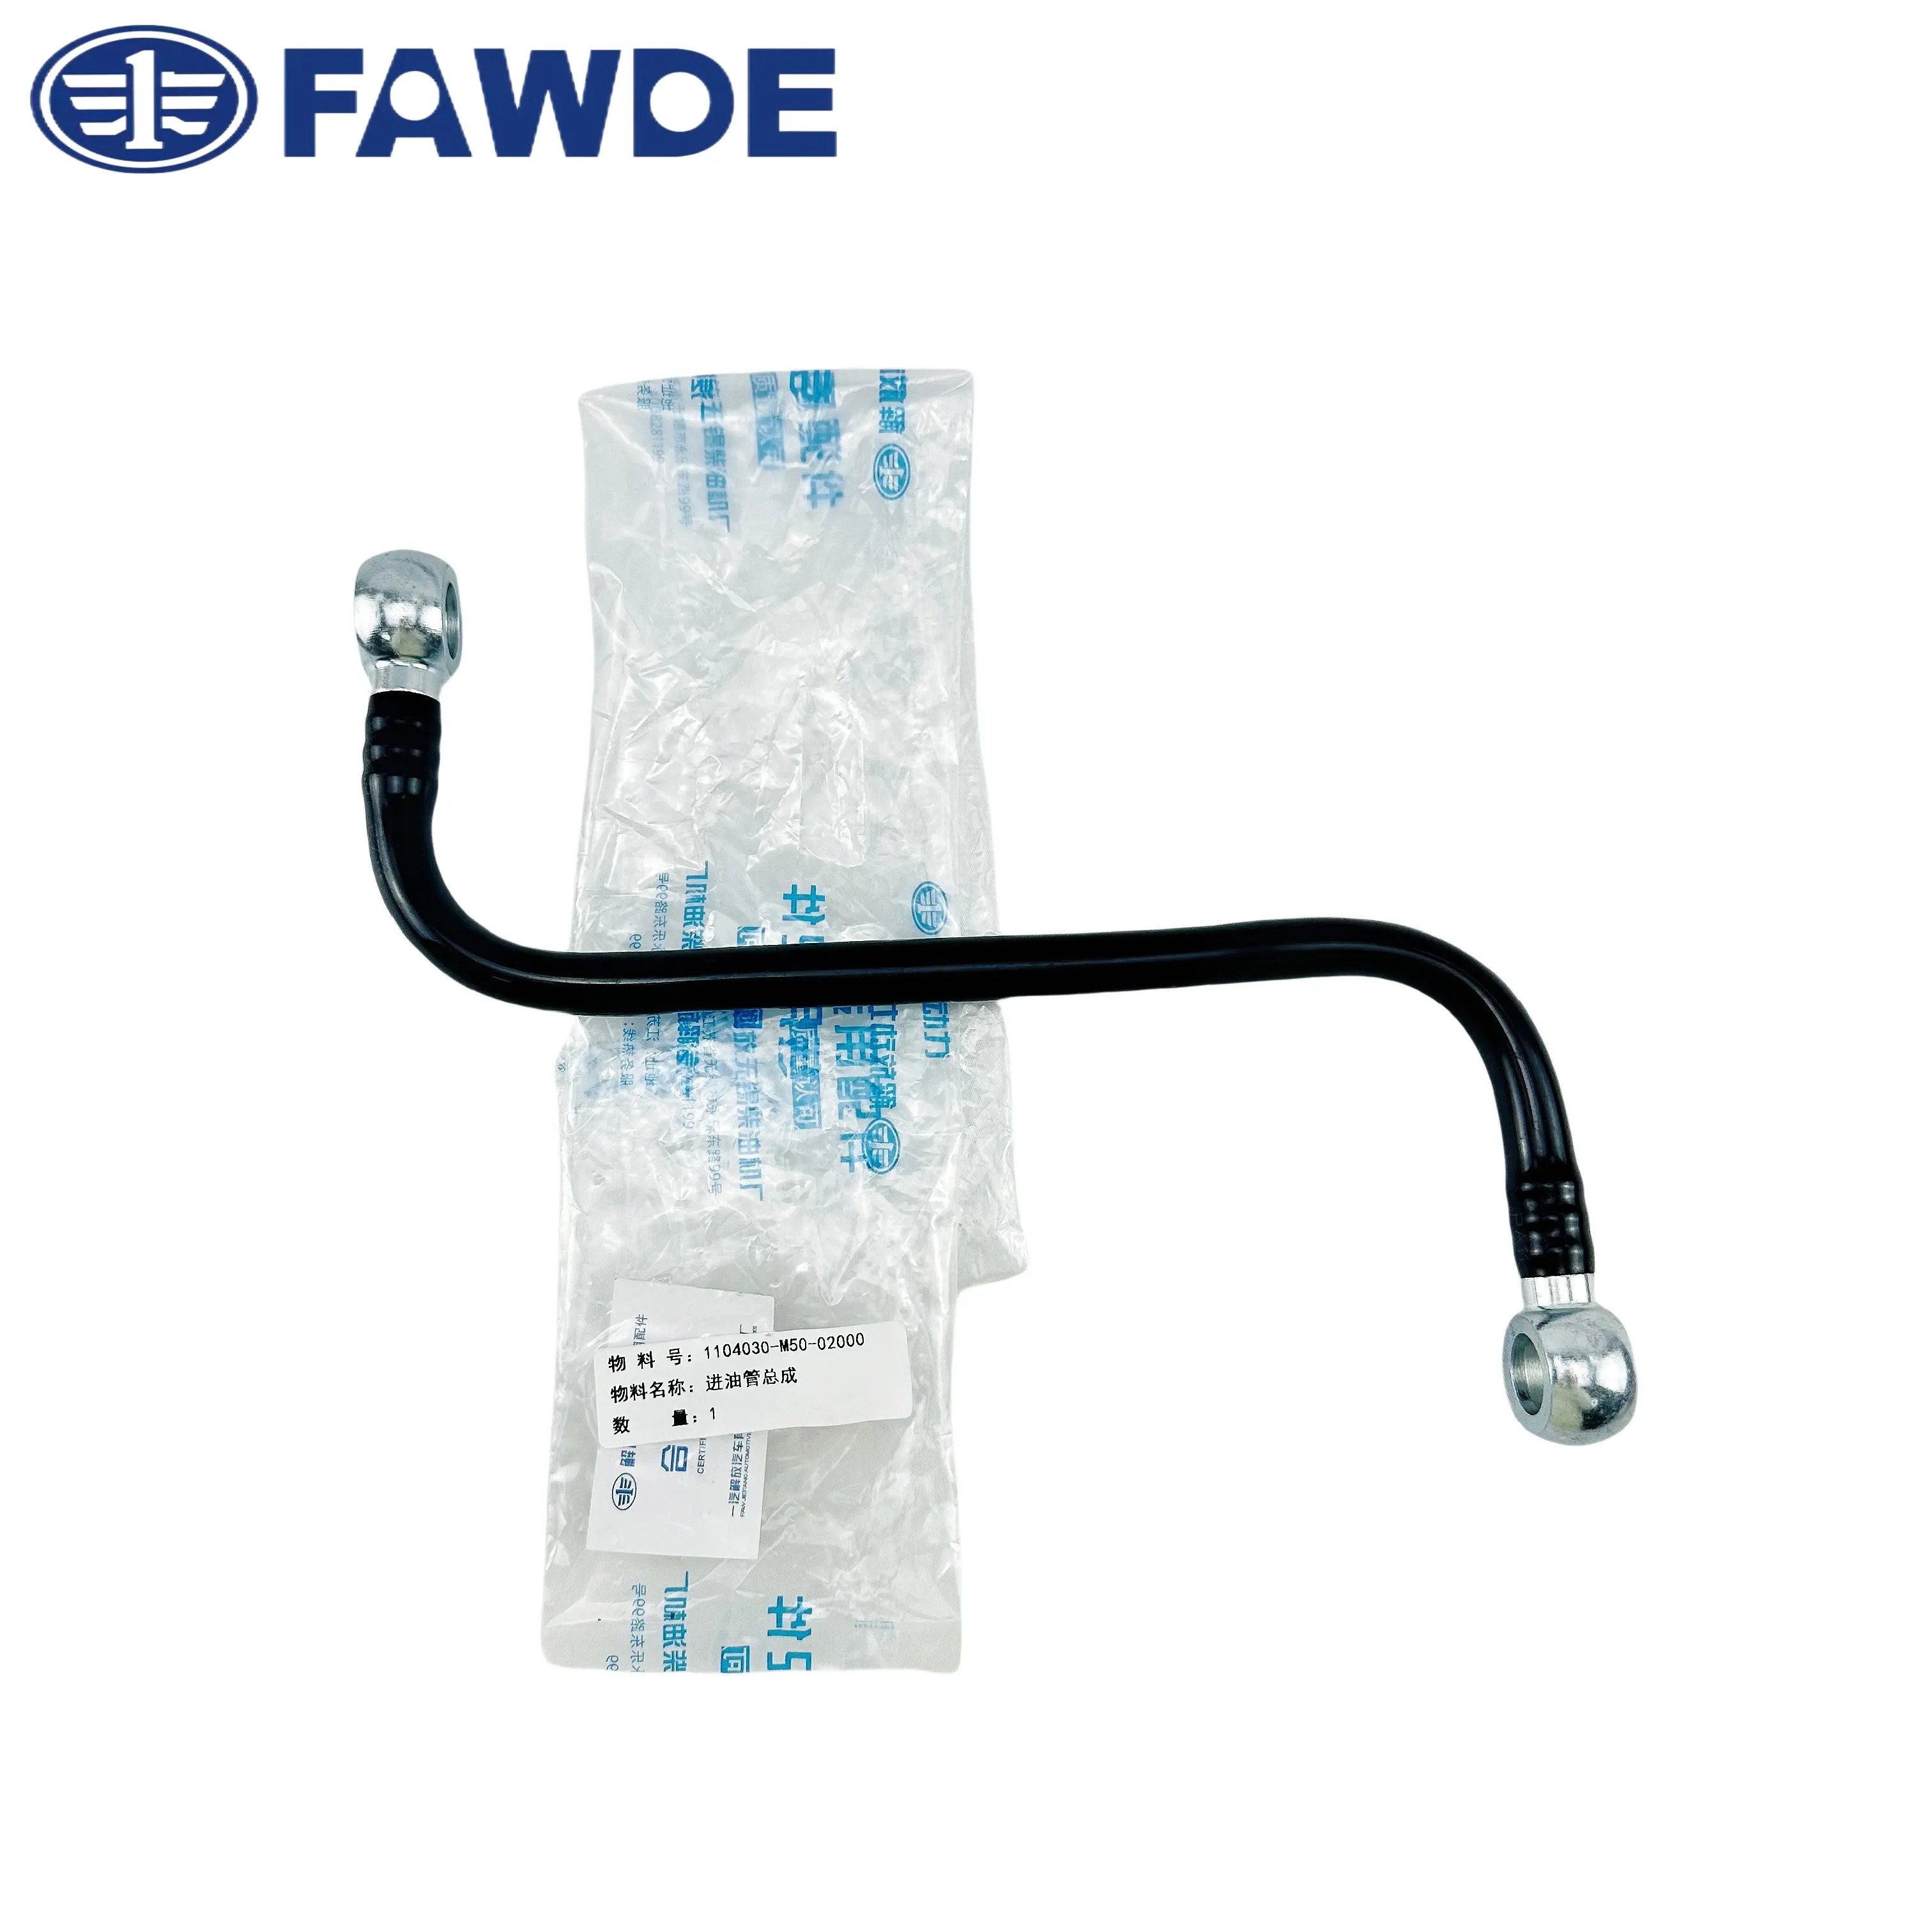 FAW JIEFANG New Original Oil Inlet Pipe Assembly Truck Engine Parts Oil Transfer Pump Diesel Filter Model 1104030-M50-02000